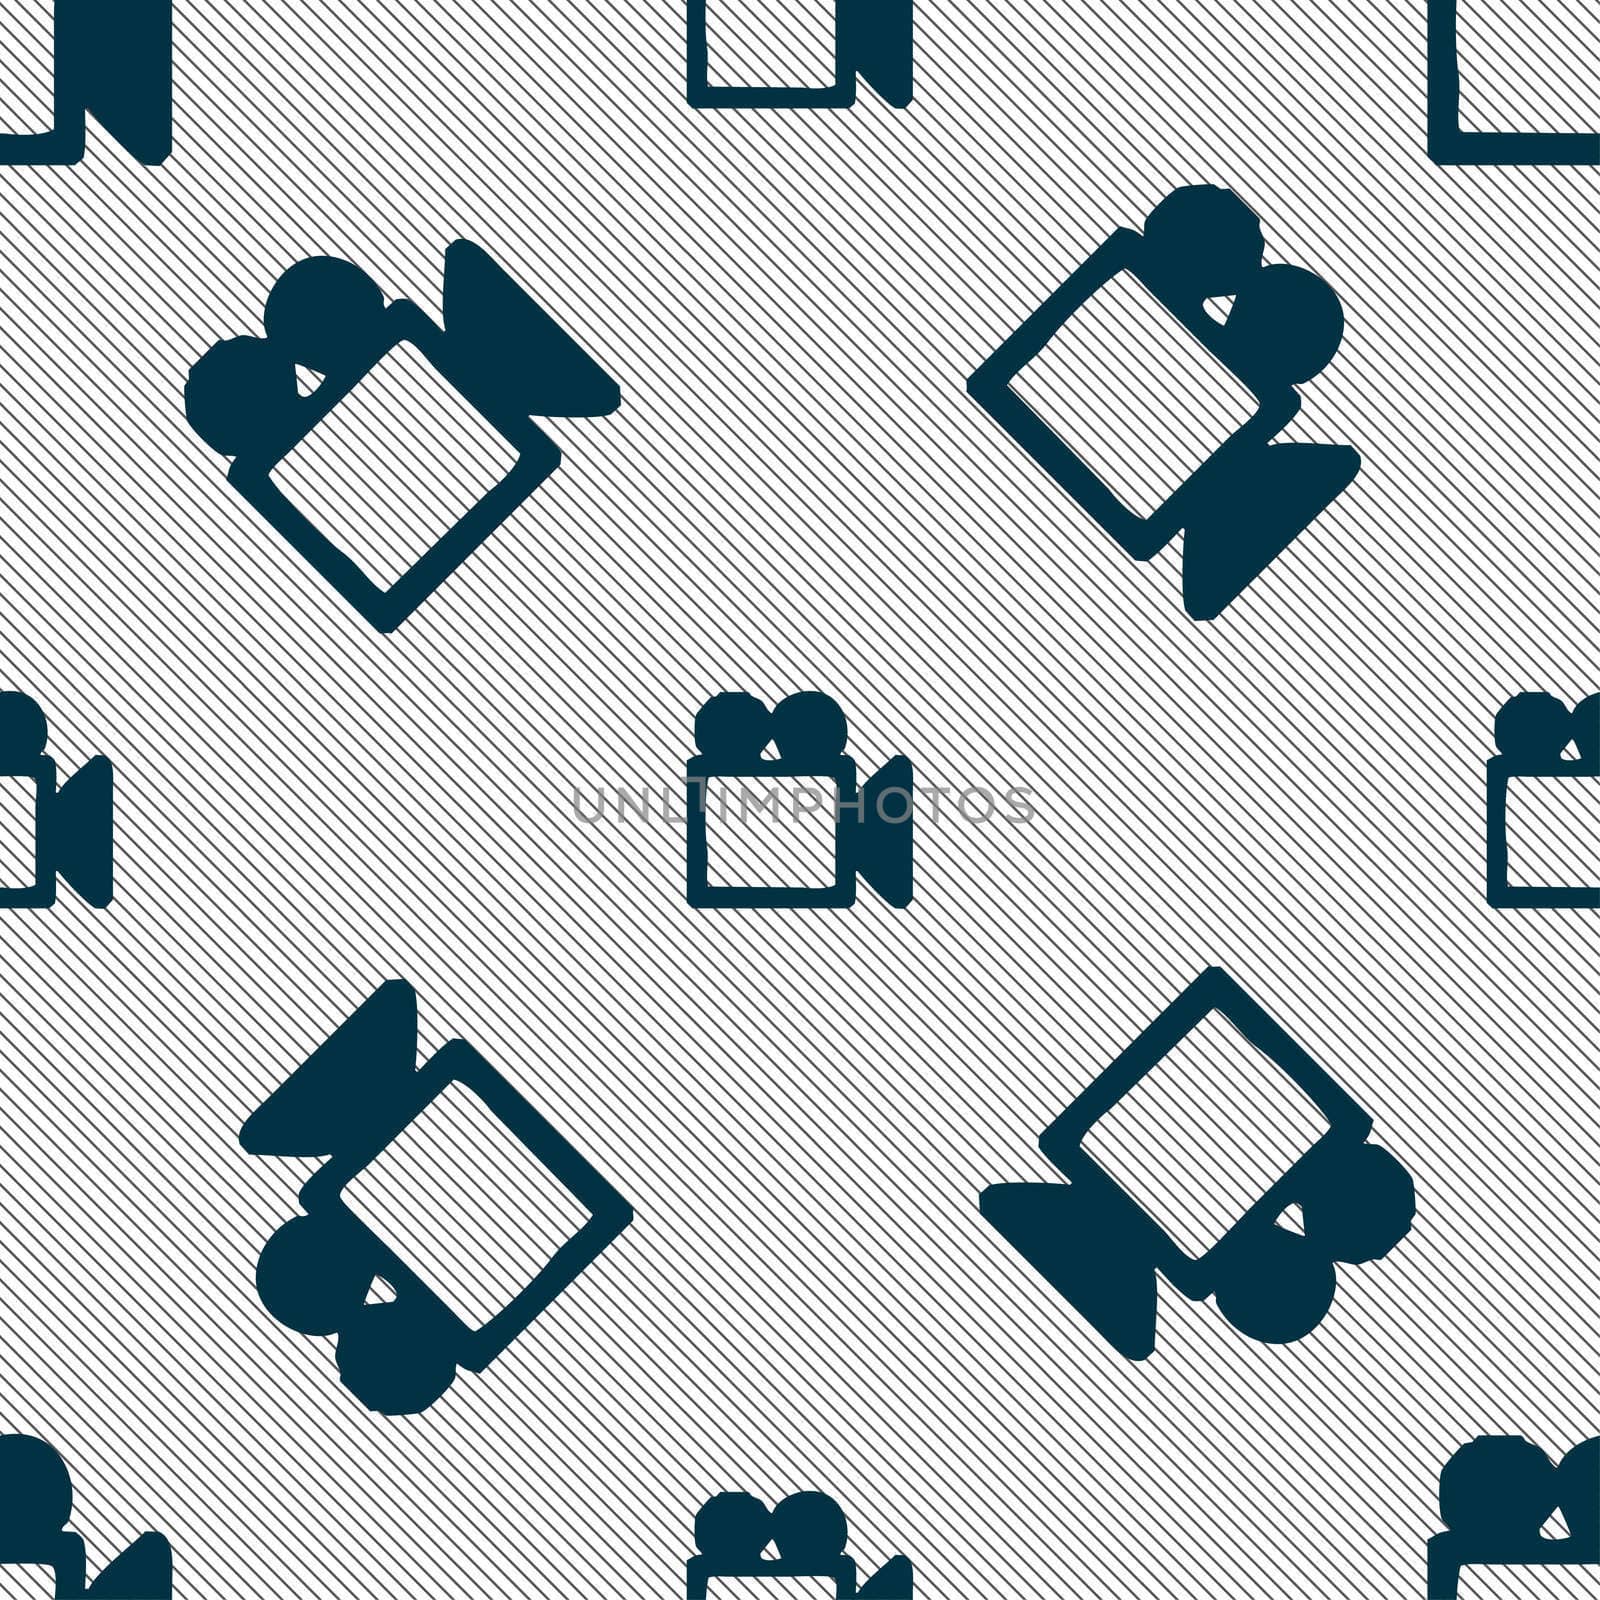 camcorder icon sign. Seamless pattern with geometric texture. illustration